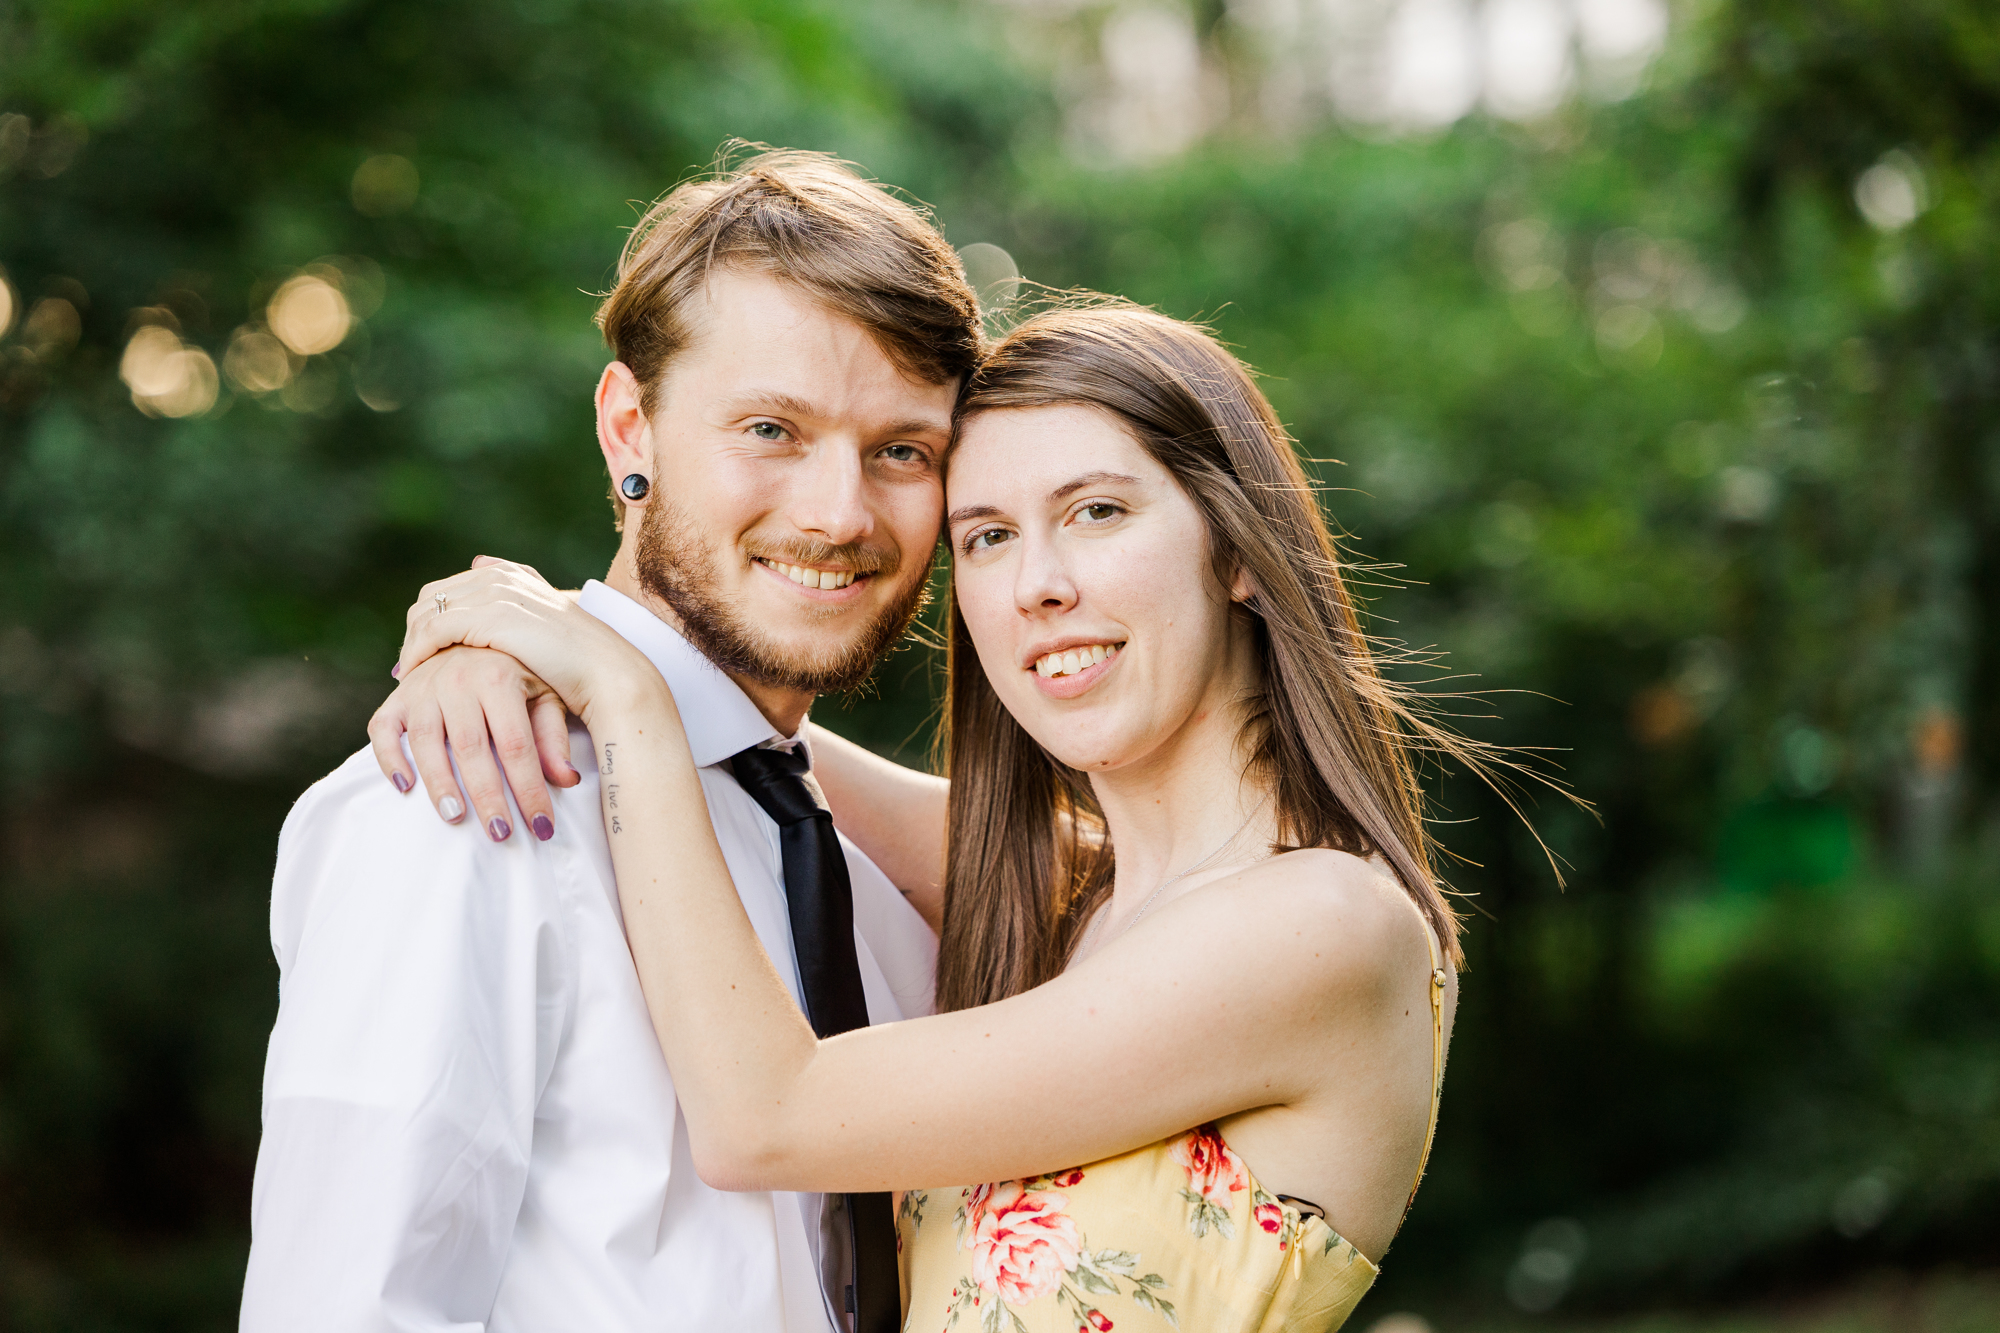 Pretty Central Park Elopement in the Summertime